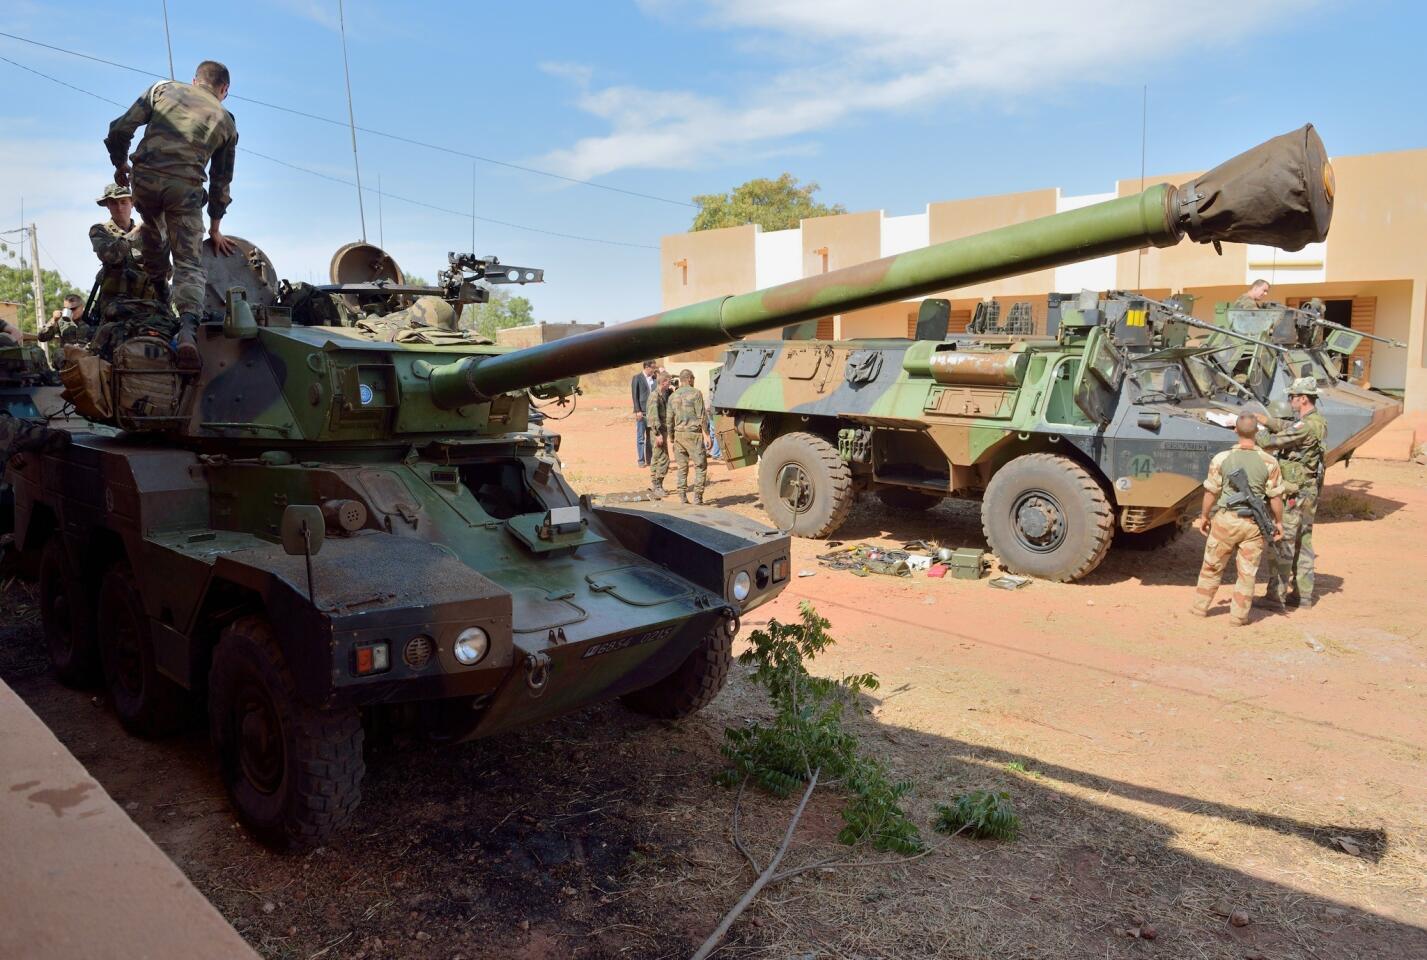 French troops prepare for Mali deployment